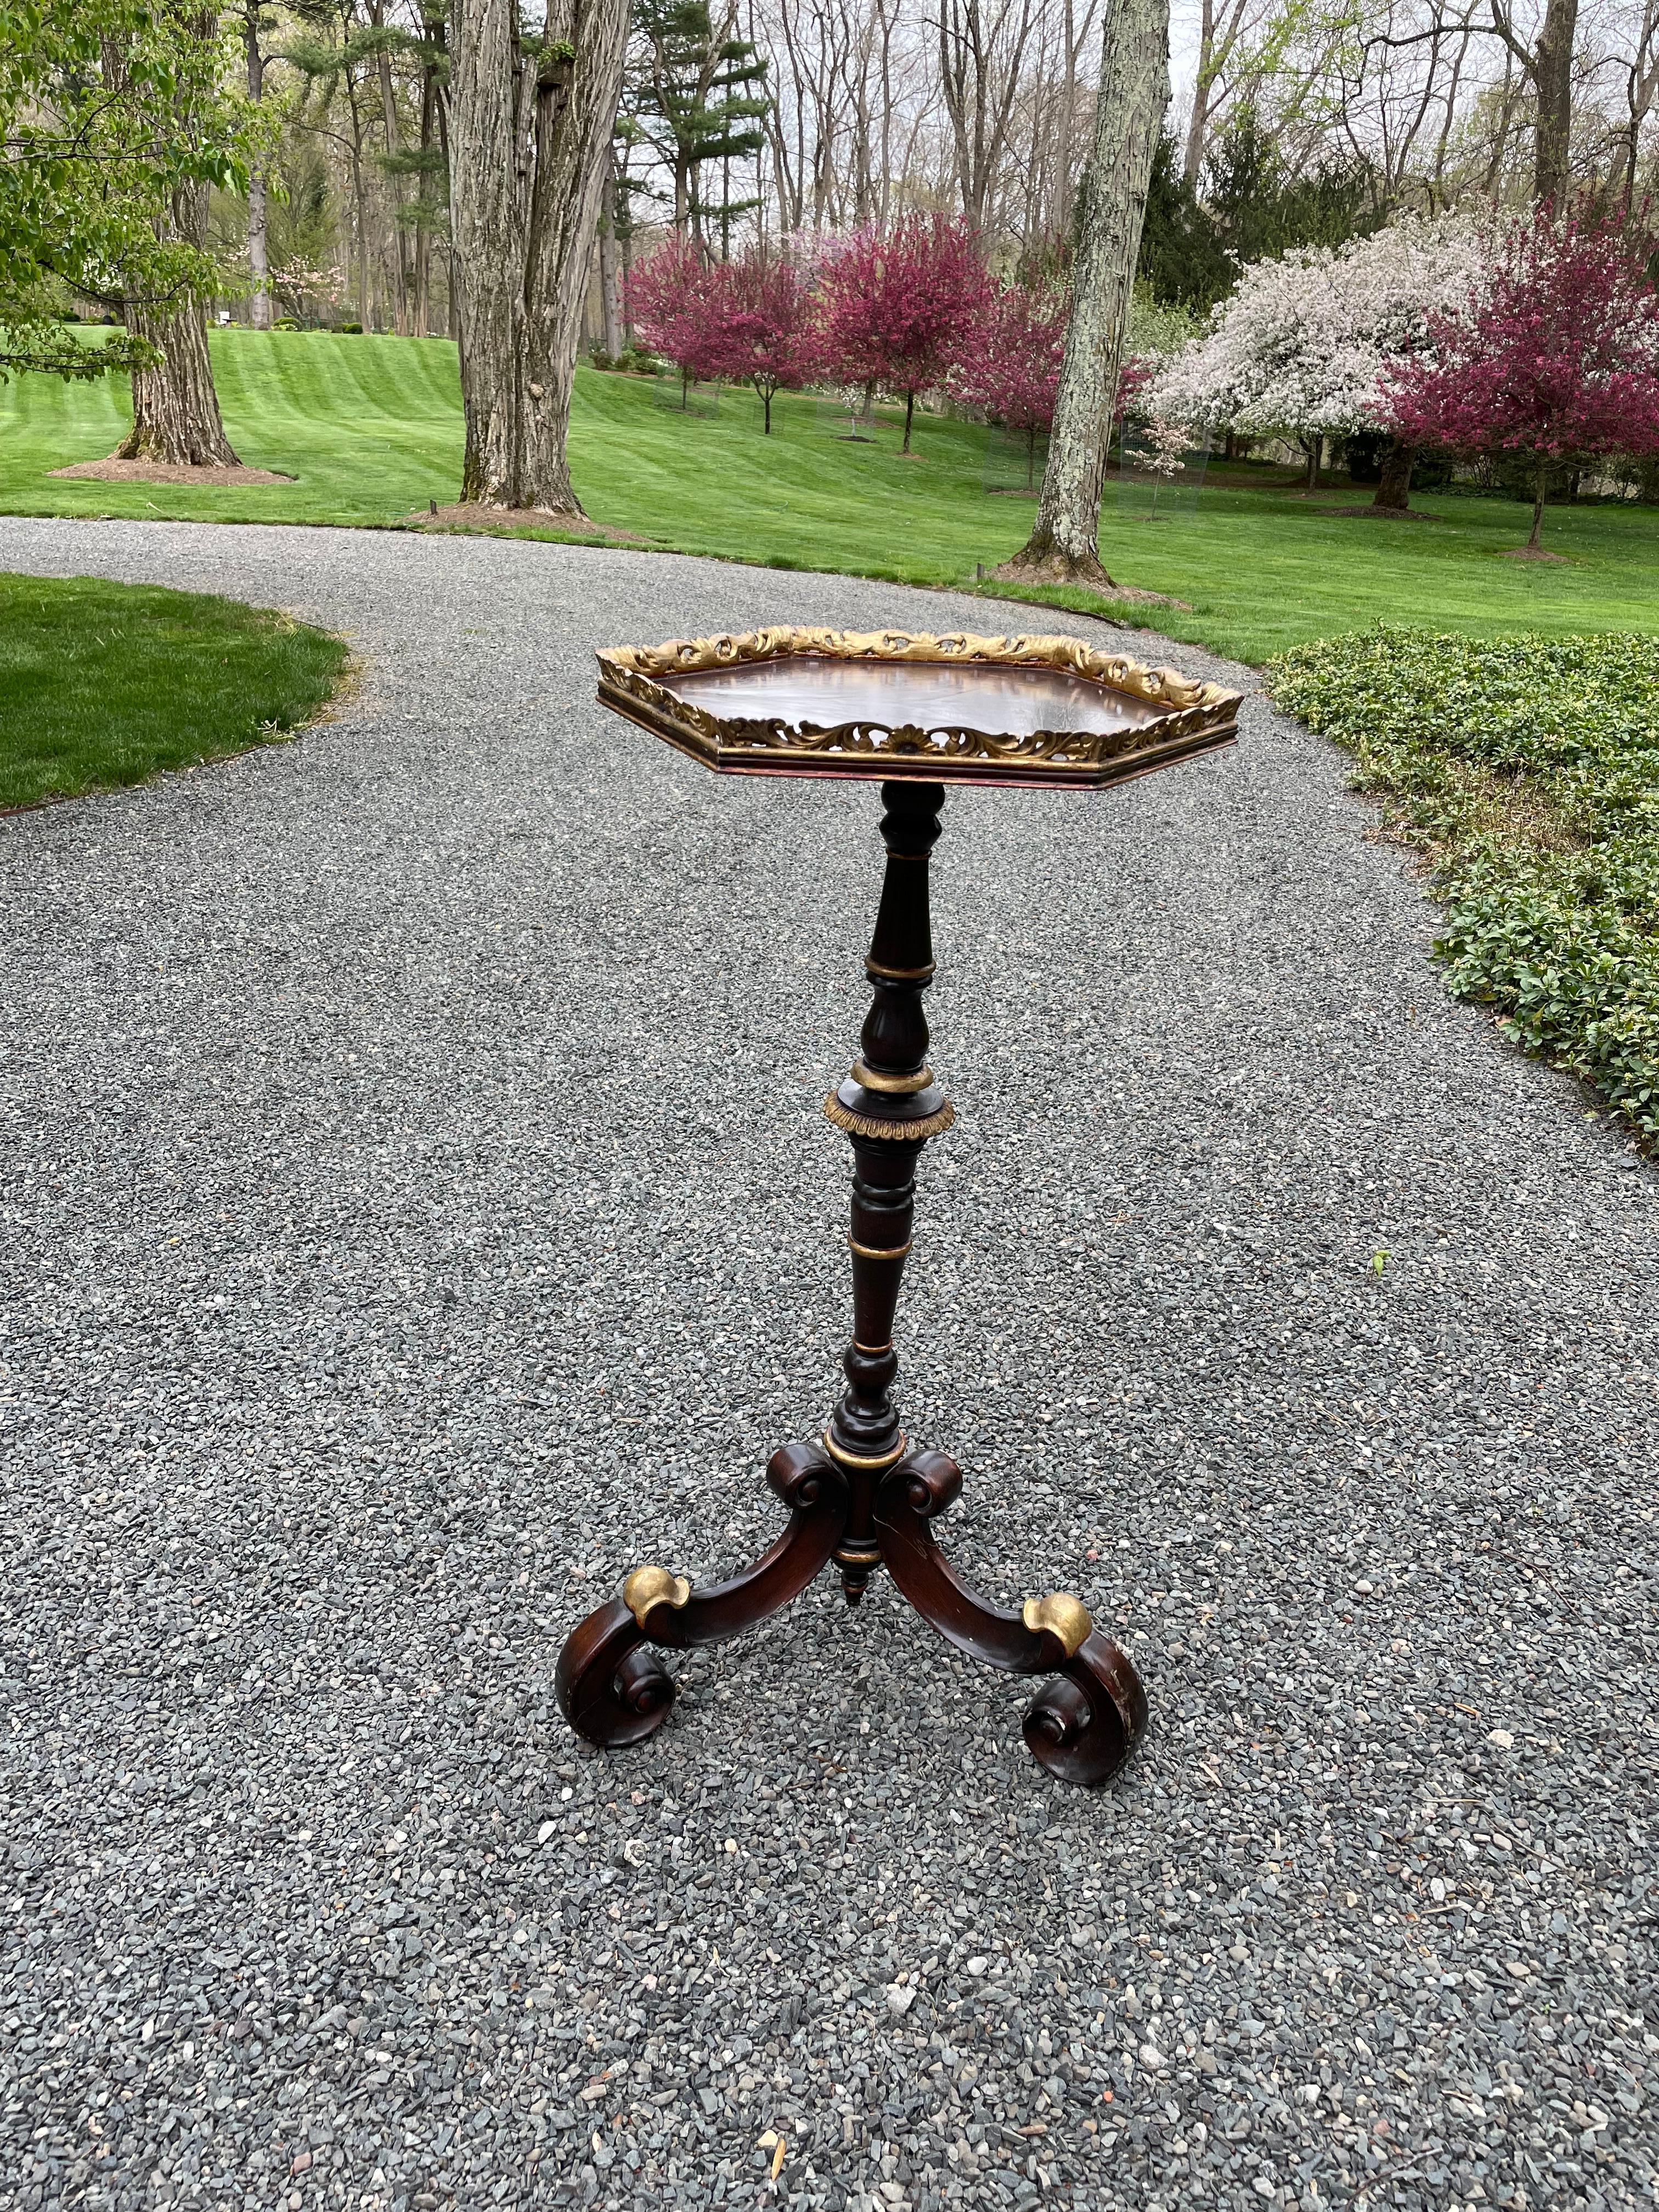 Lovely mahogany octagonal shaped plant Stand having gilded gallery and elaborate scrolled base. Some of the base has gilded embellishment as well.